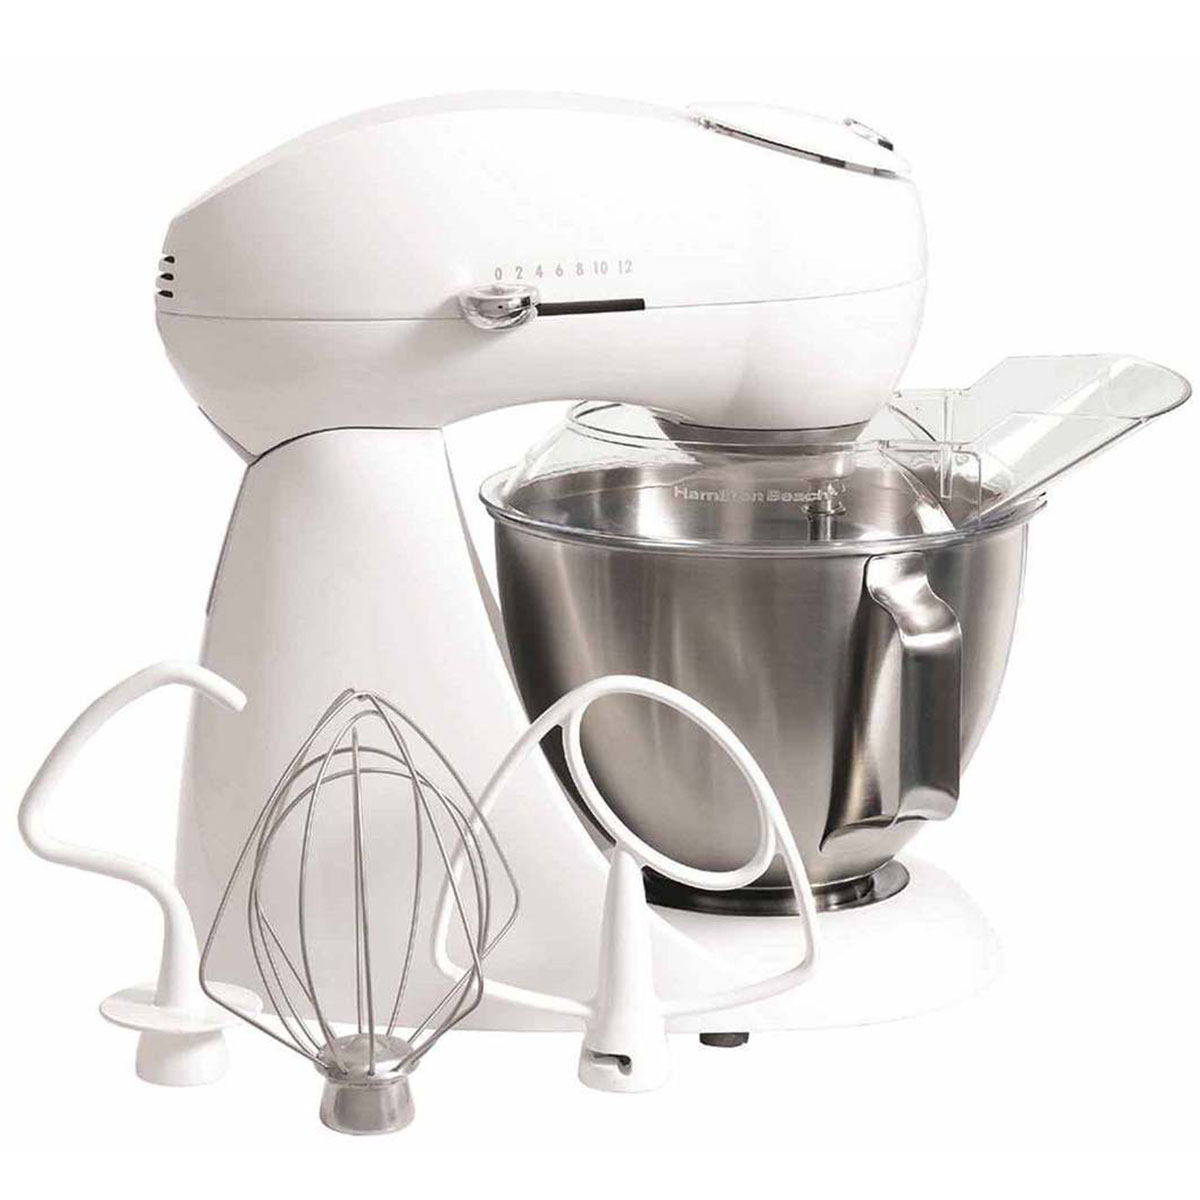 Eclectrics® Sugar (White) All-Metal Stand Mixer (63221)